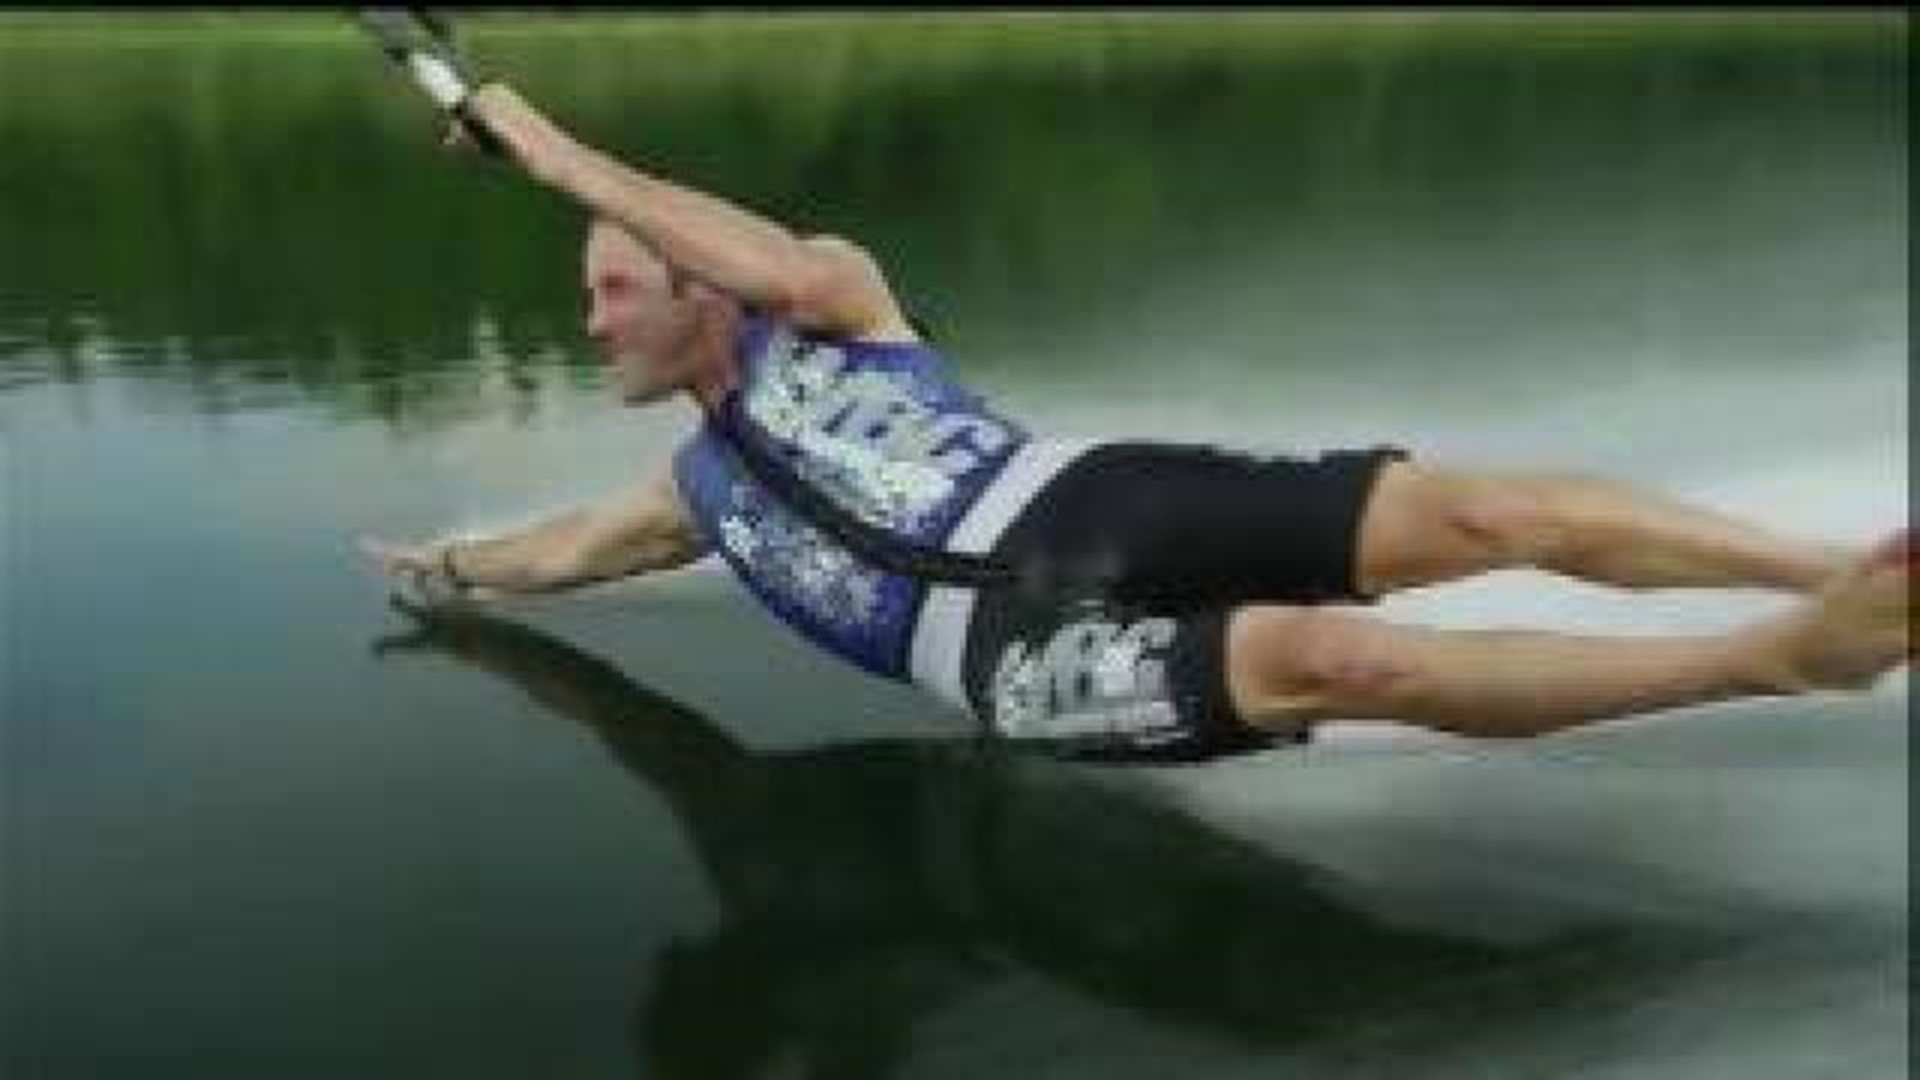 Stunt team shows skills on the water